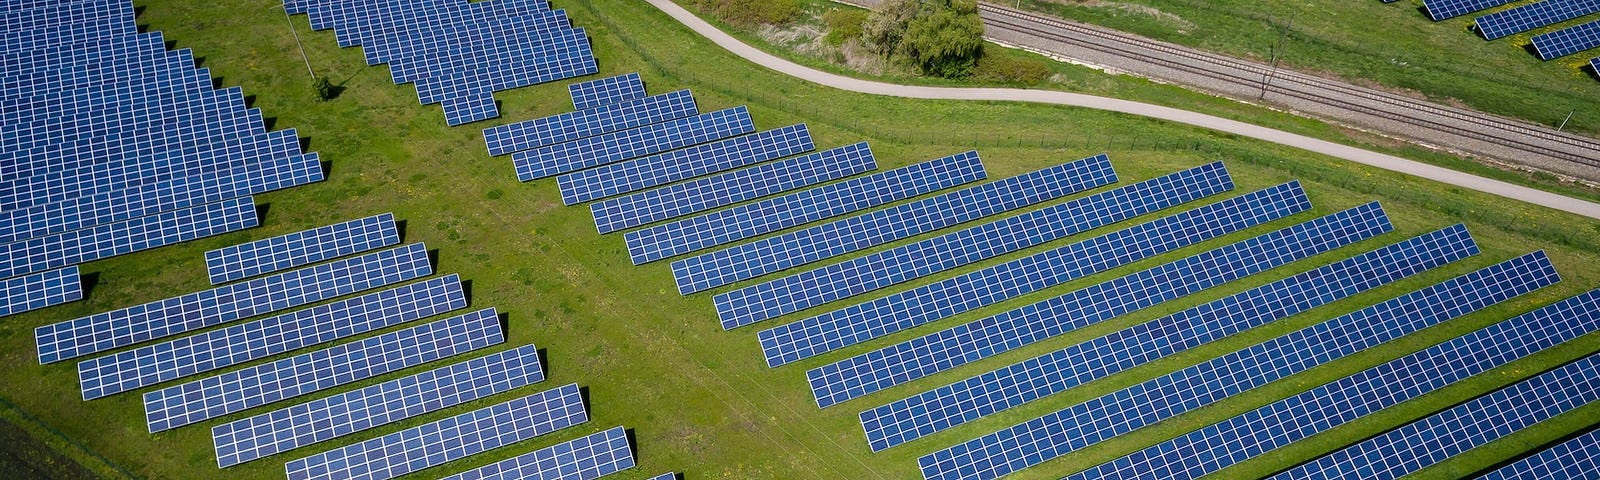 IMAGE: A large solar panel installation in a field